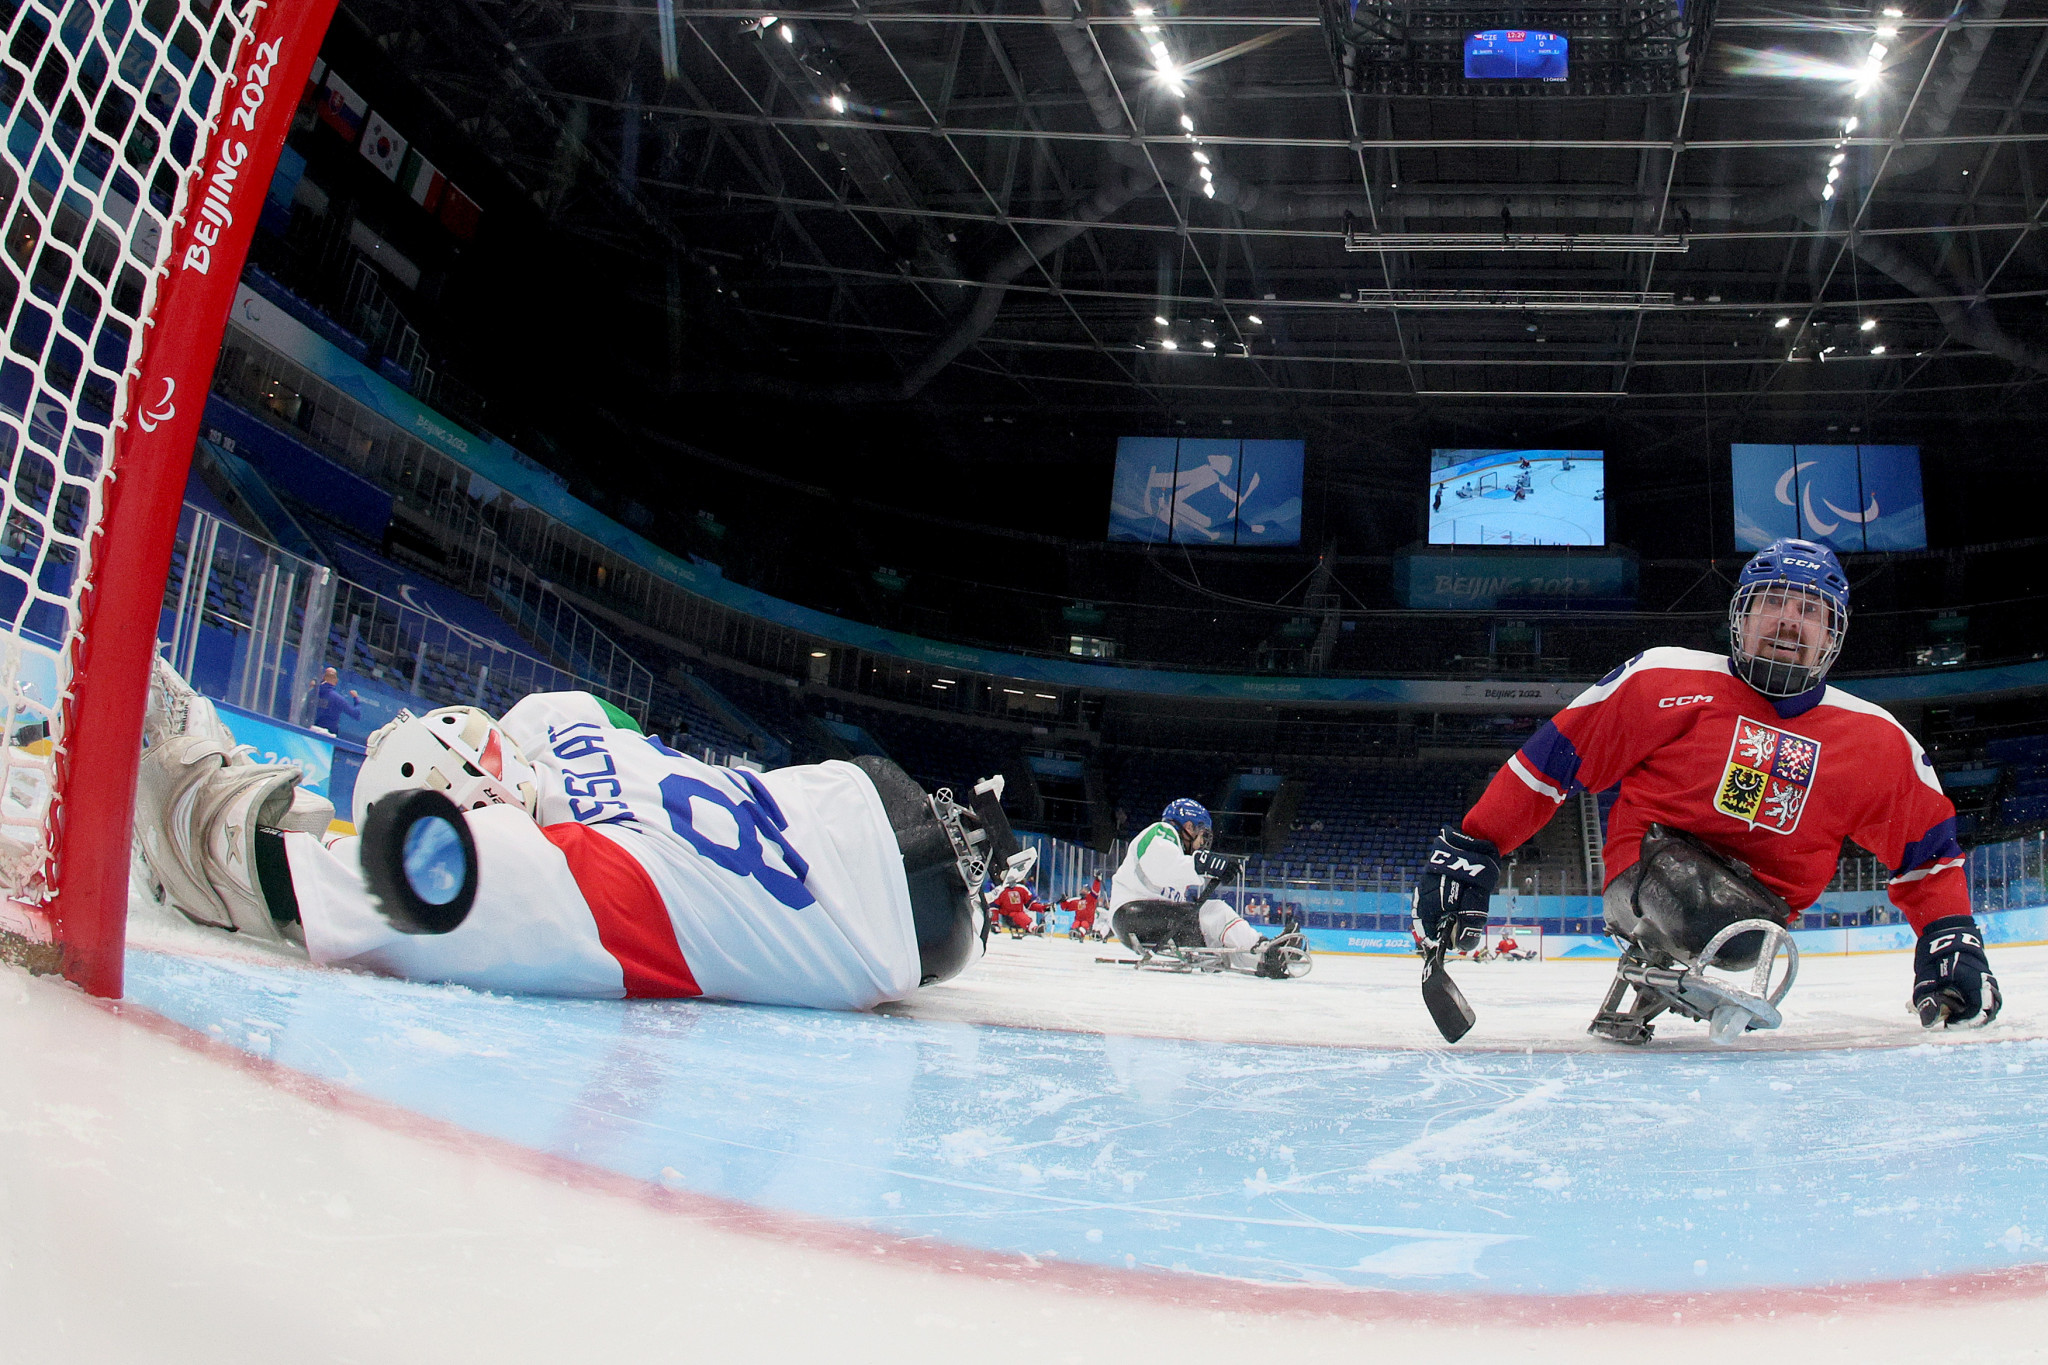 The Czech Republic scored five goals against Italy in Group B  ©Getty Images